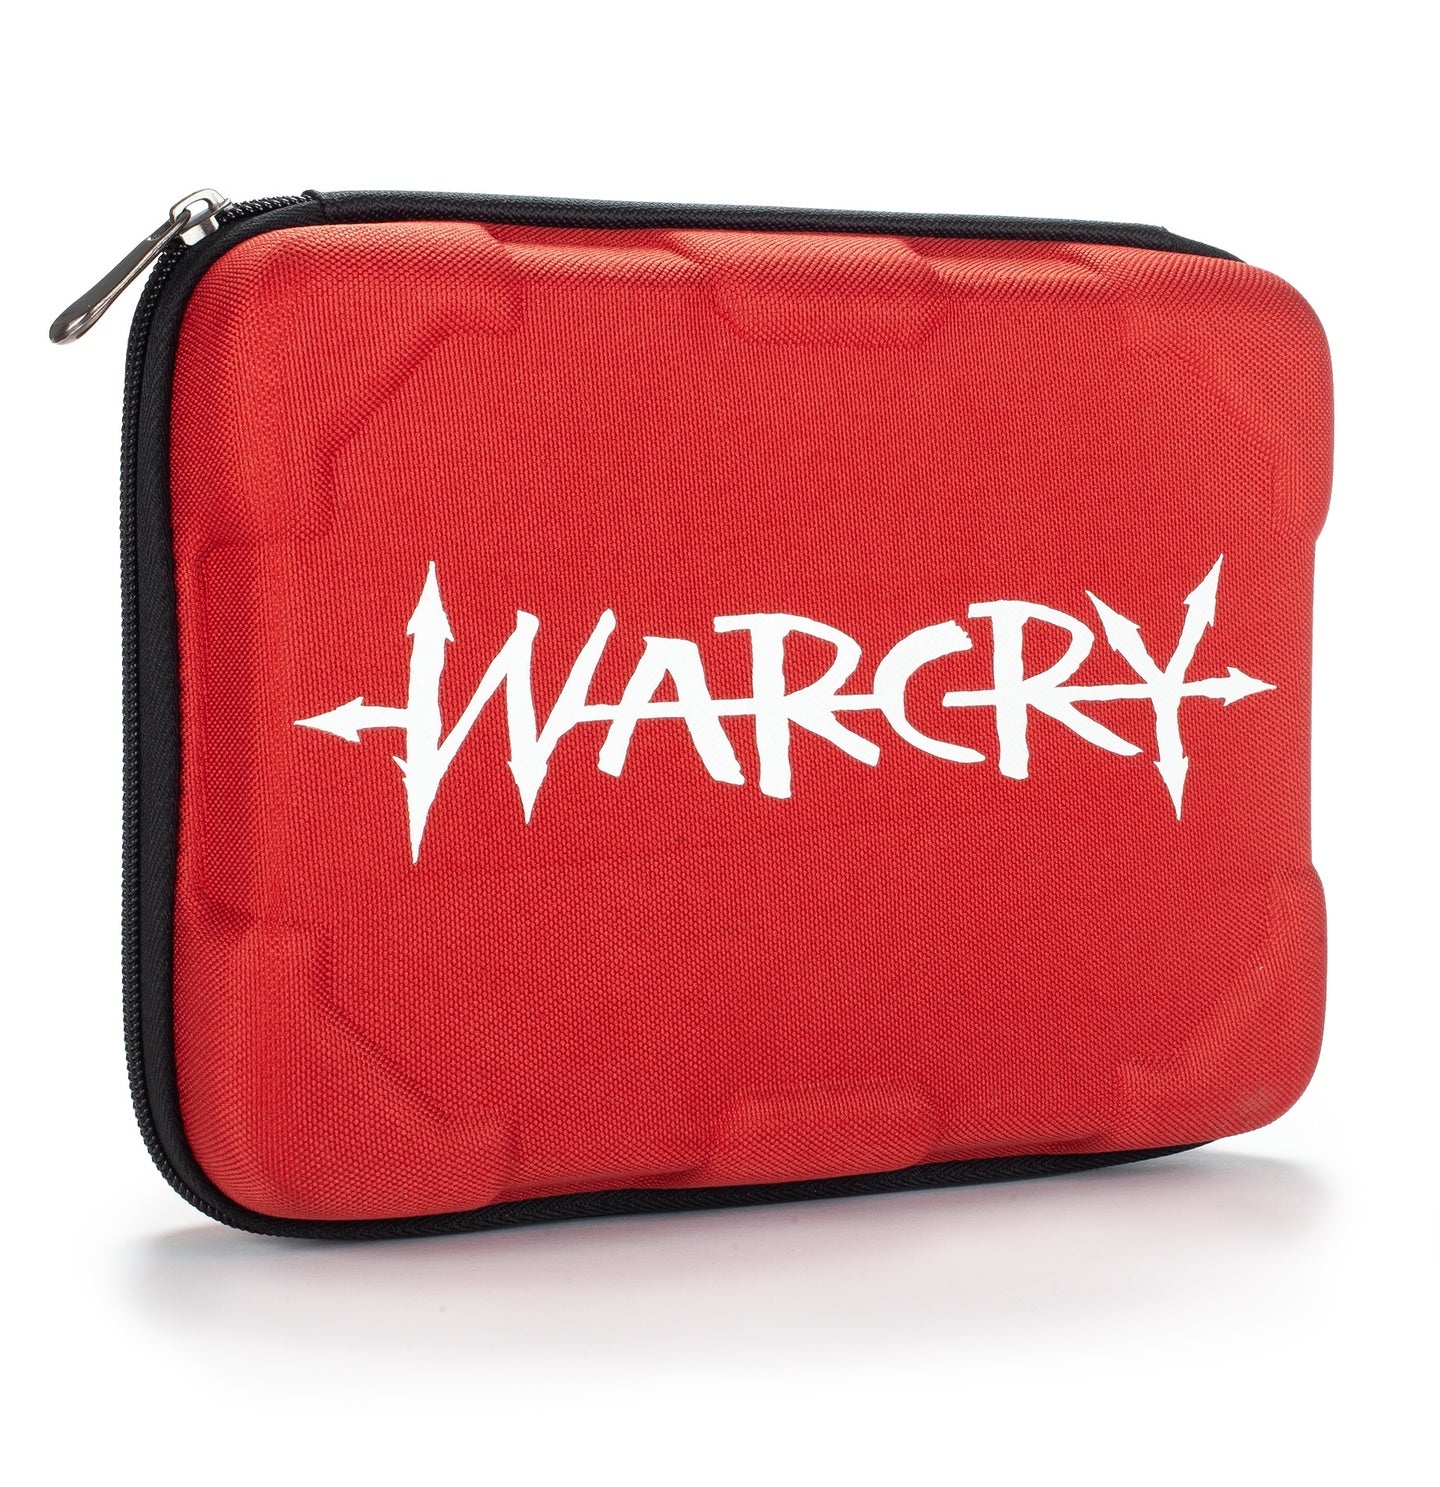 WARCRY CARRY CASE - Linebreakers